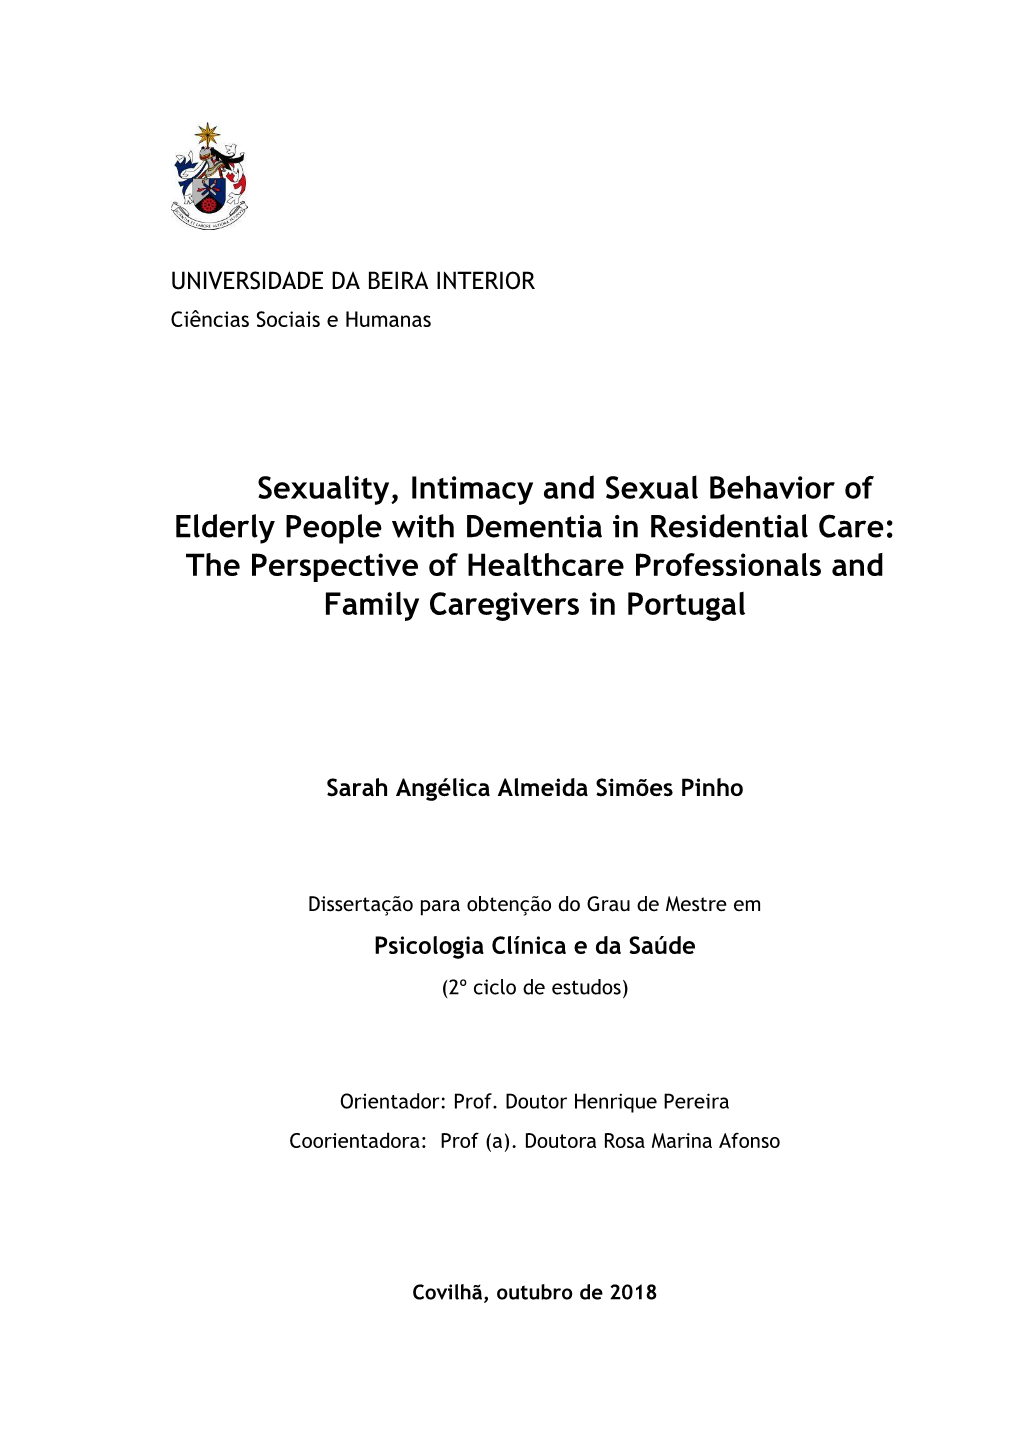 Sexuality, Intimacy and Sexual Behavior of Elderly People with Dementia in Residential Care